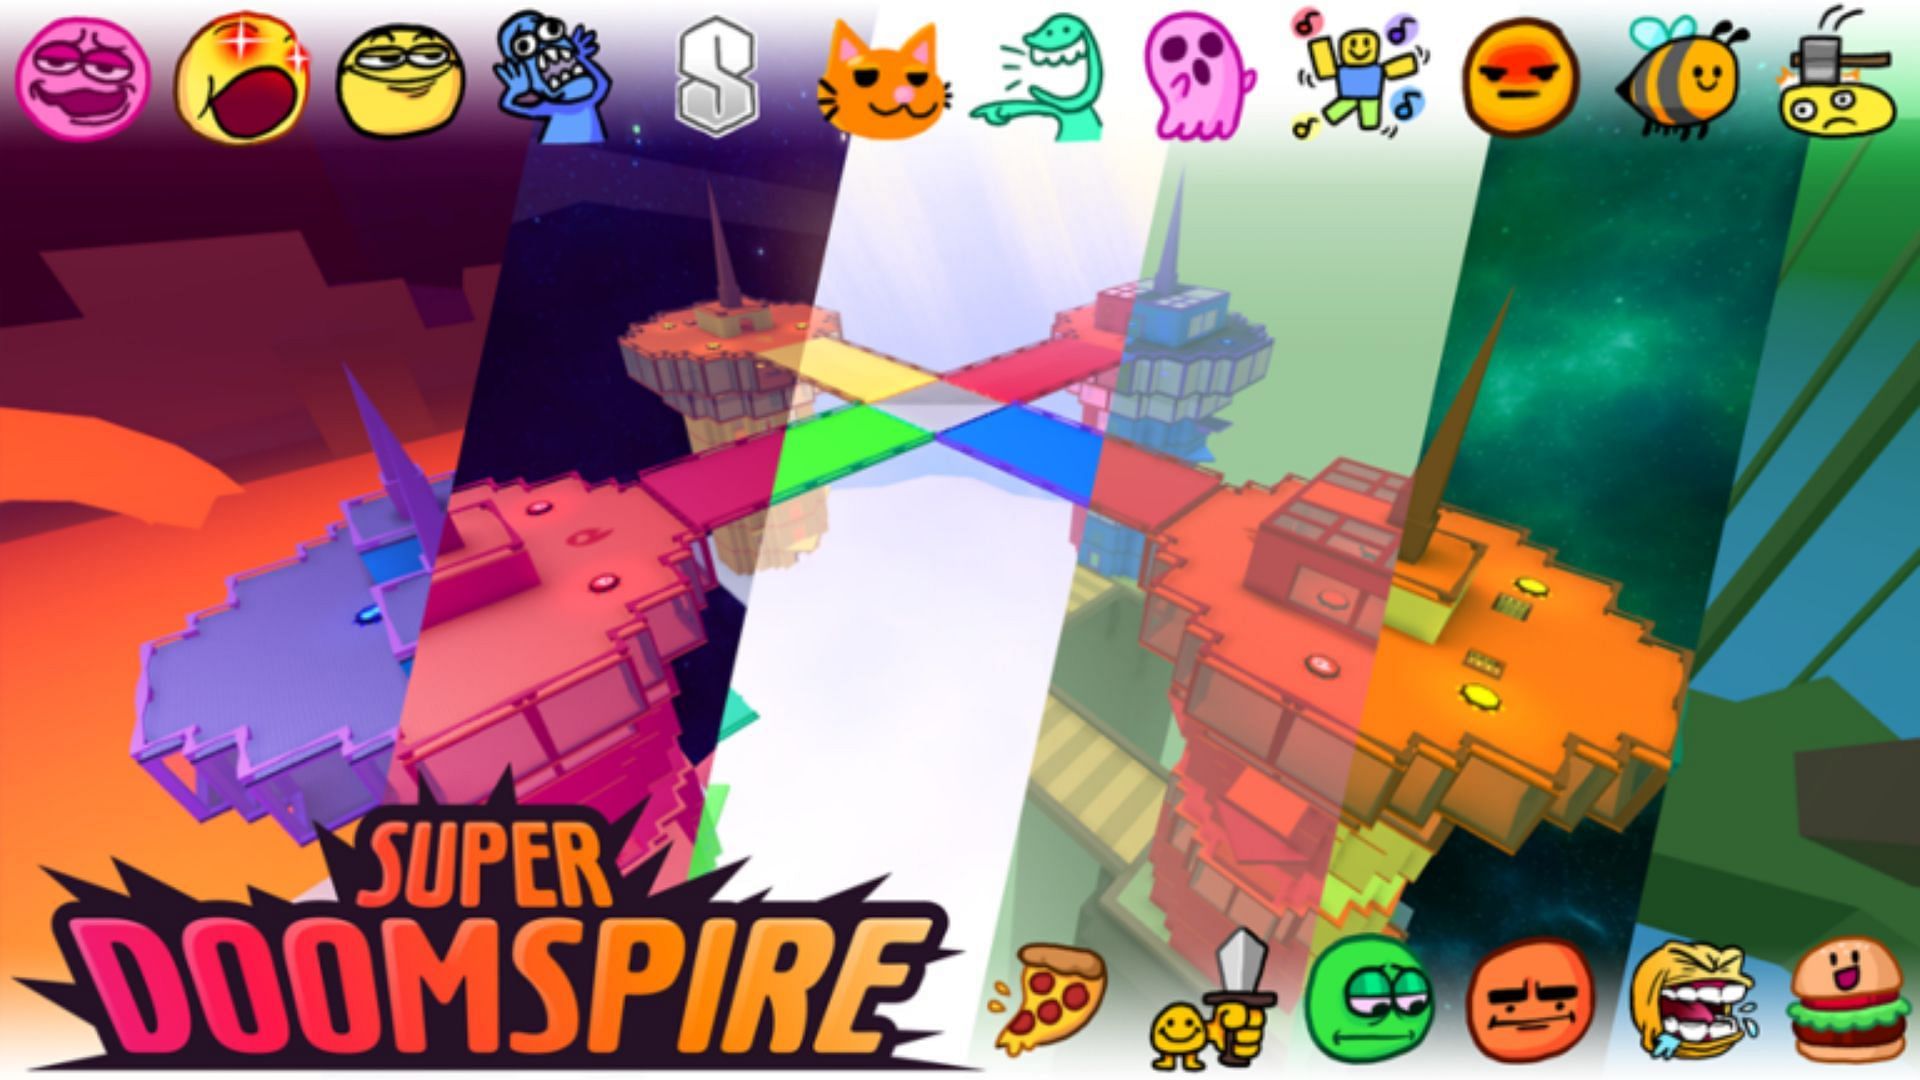 Codes for Super Doomspire and their importance (Image via Roblox)